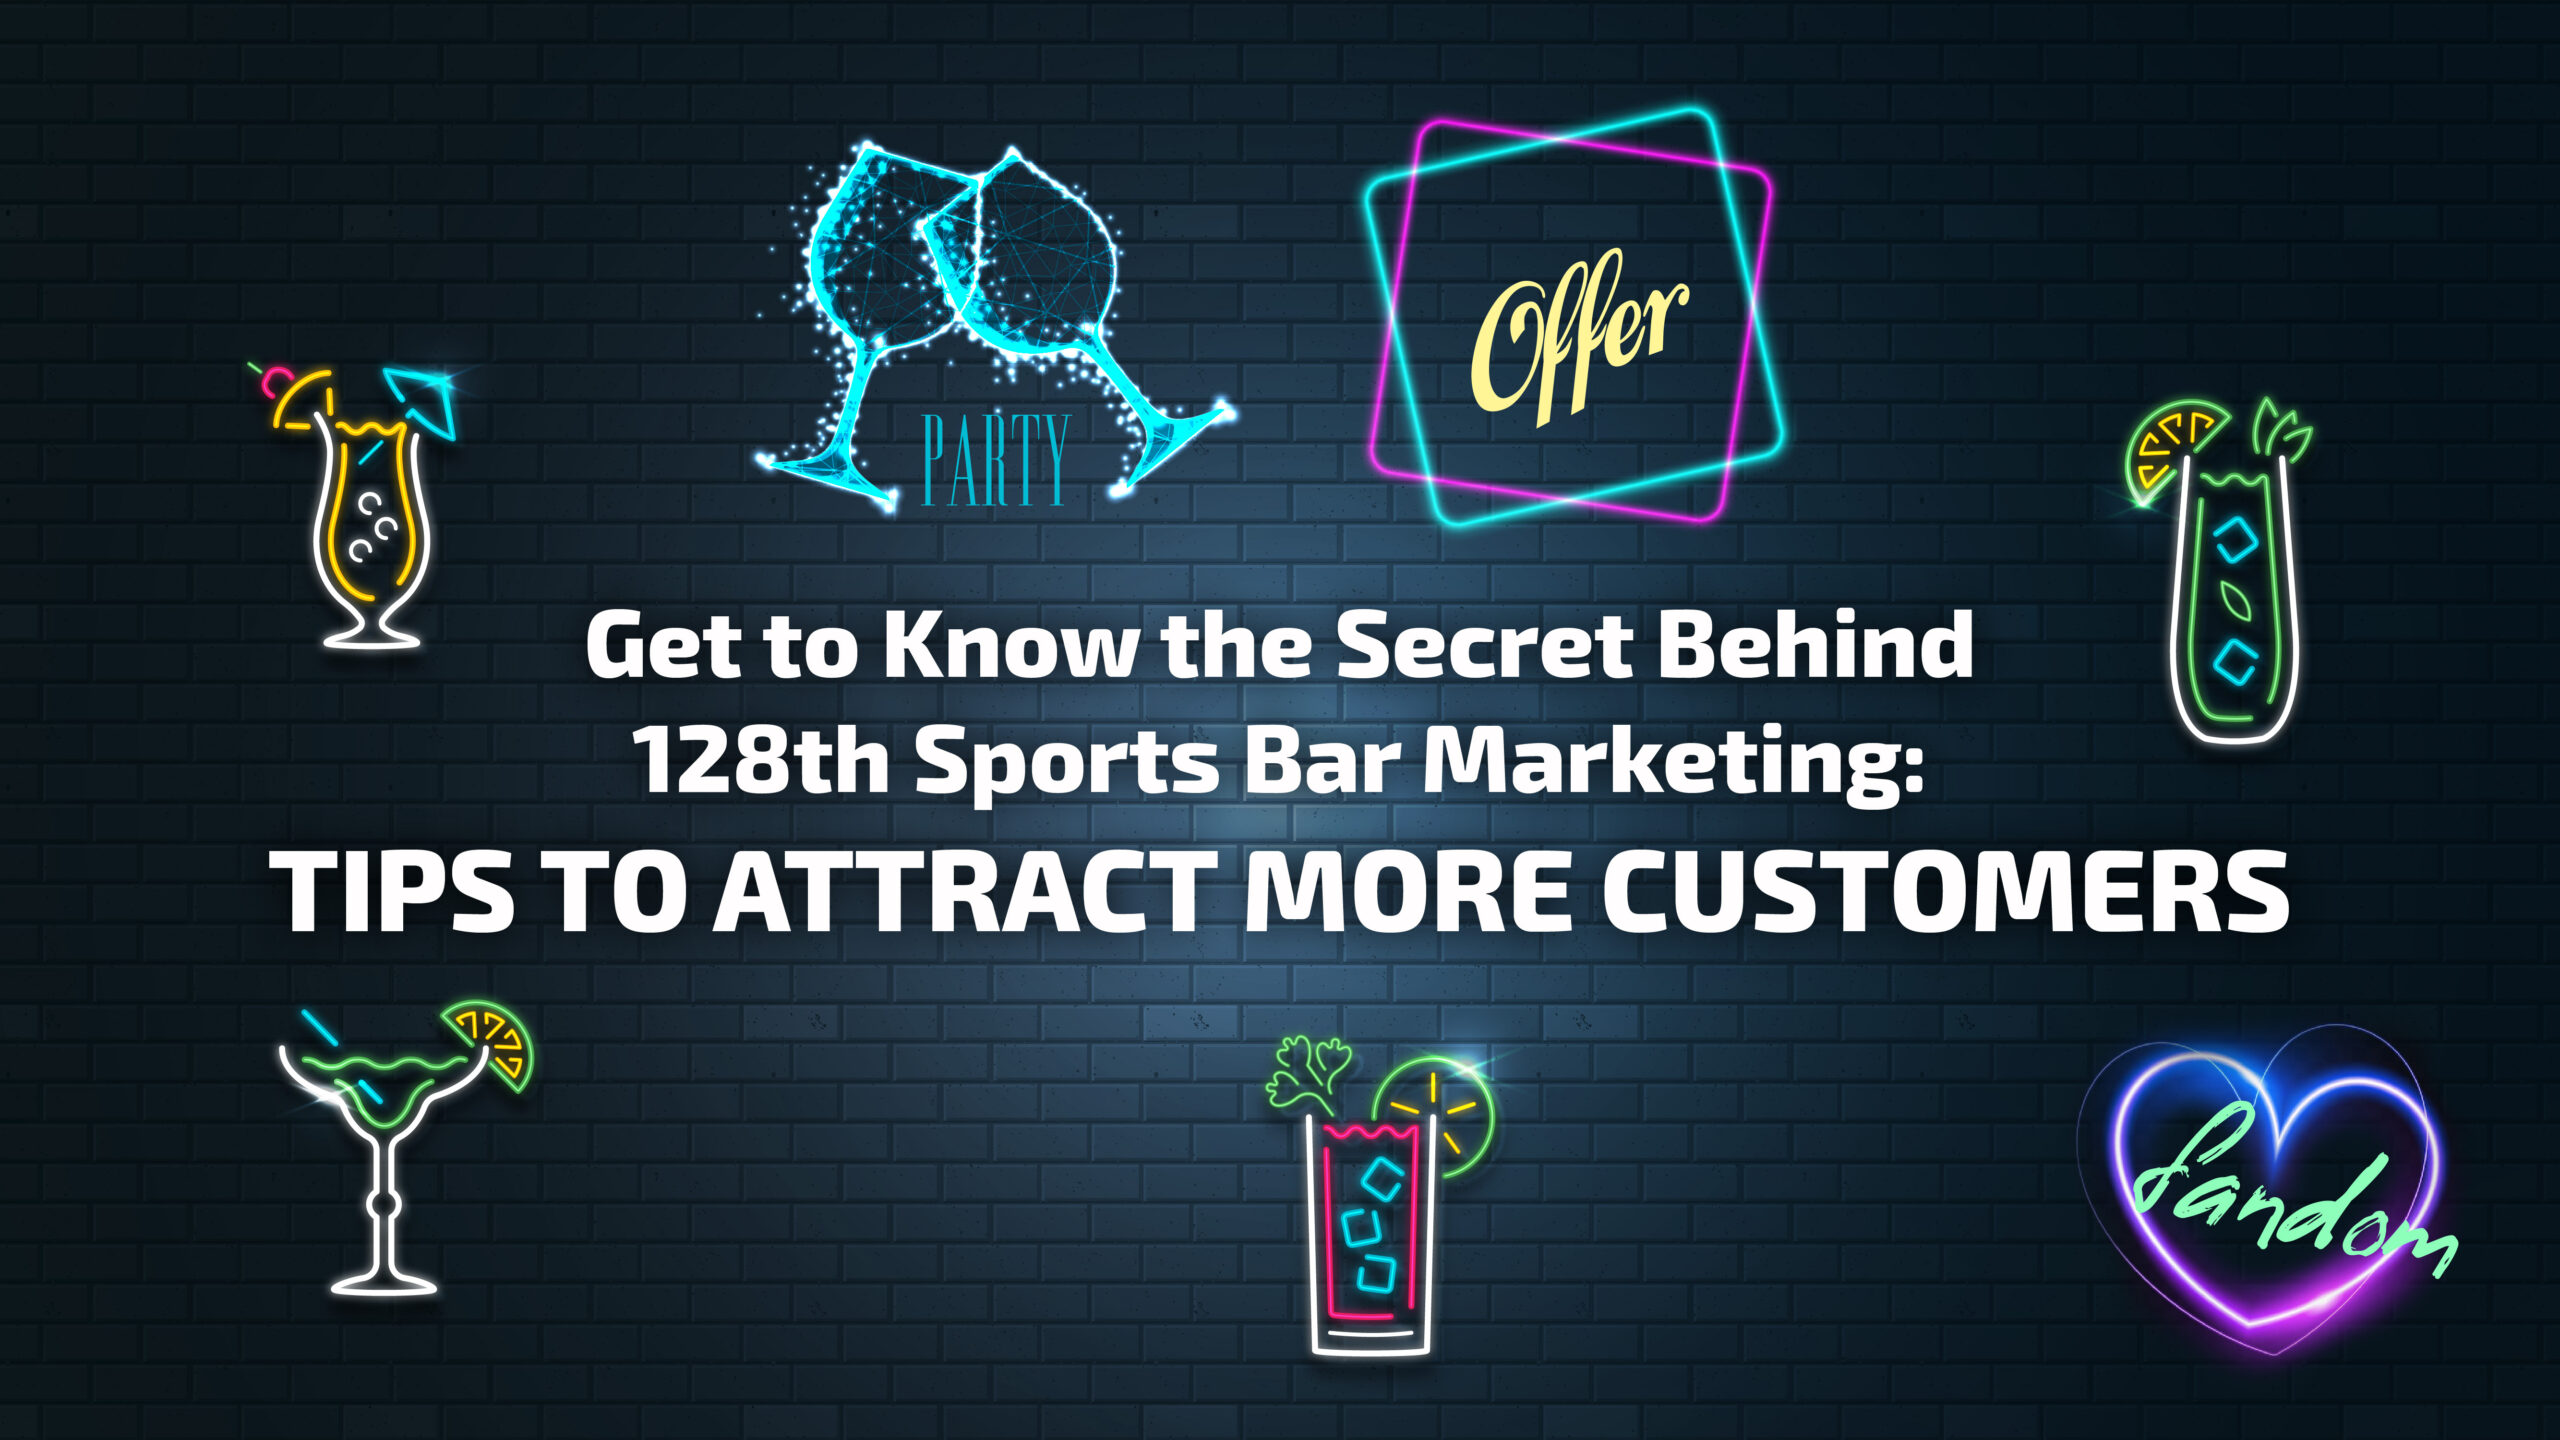 Get to Know the Secret Behind 128th Sports Bar Marketing Tips to Attract More Customers